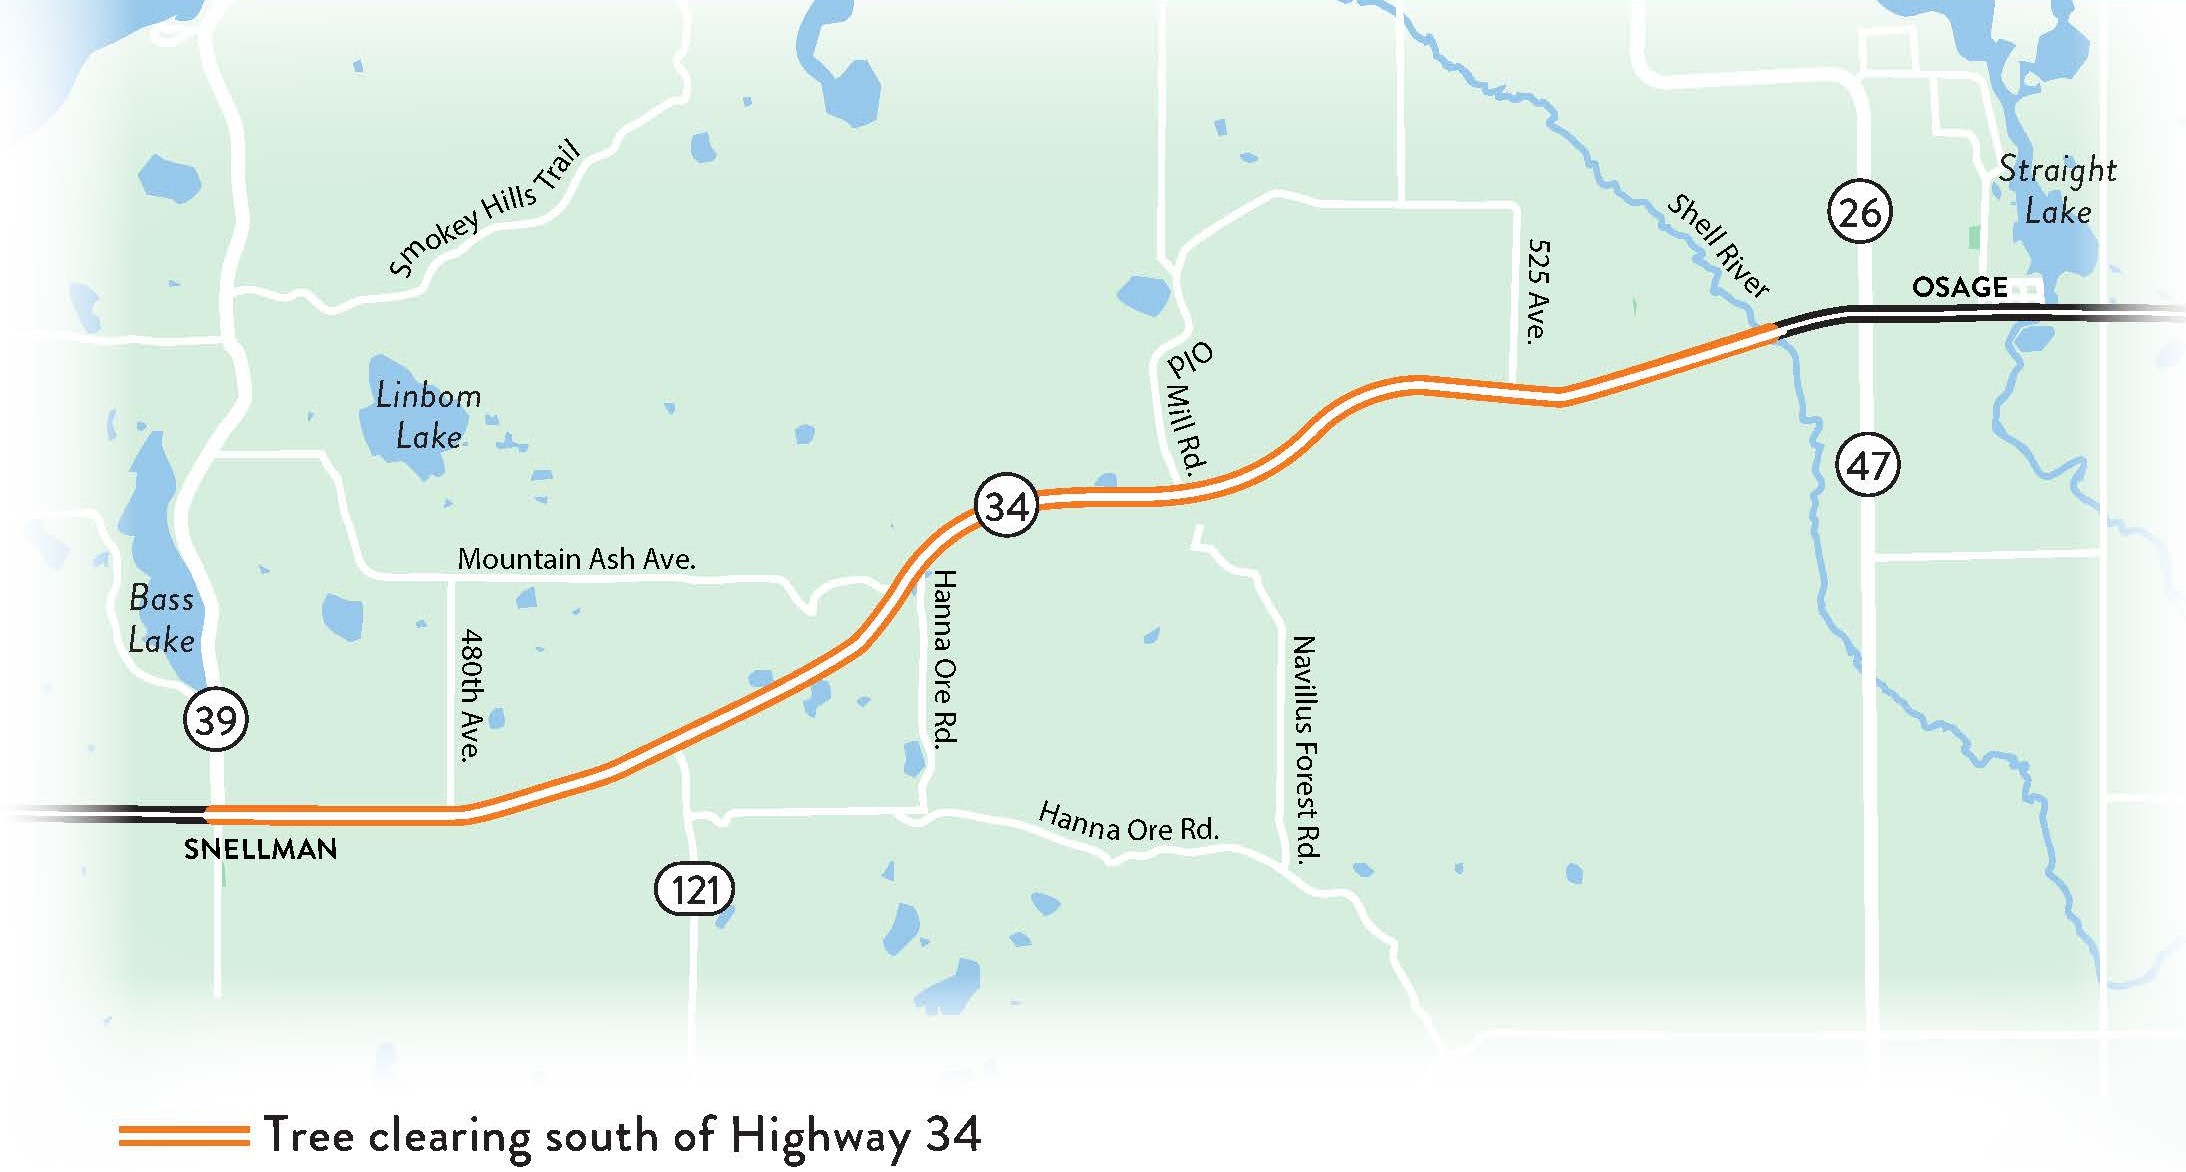 Map of tree clearing south of Highway 34